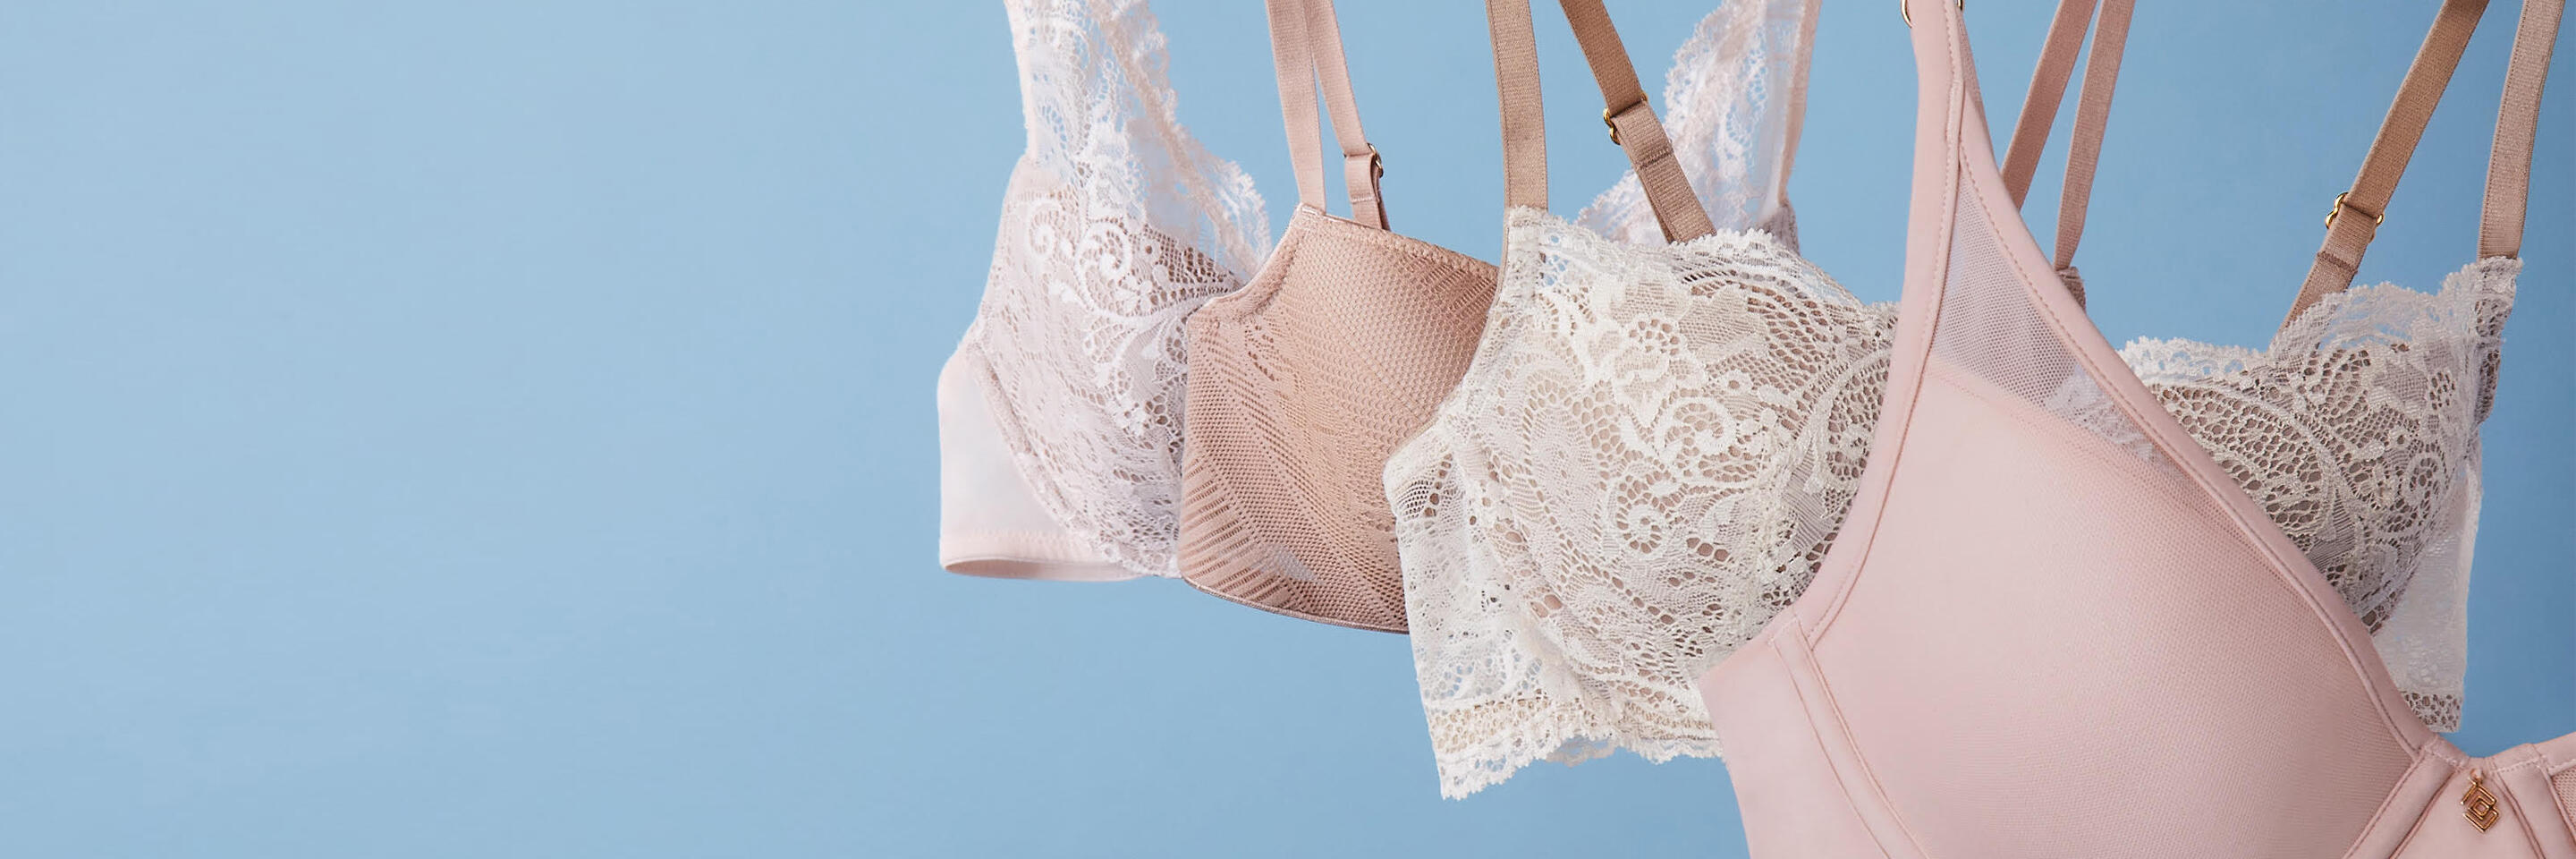 What a bra company learned while disrupting the lingerie market